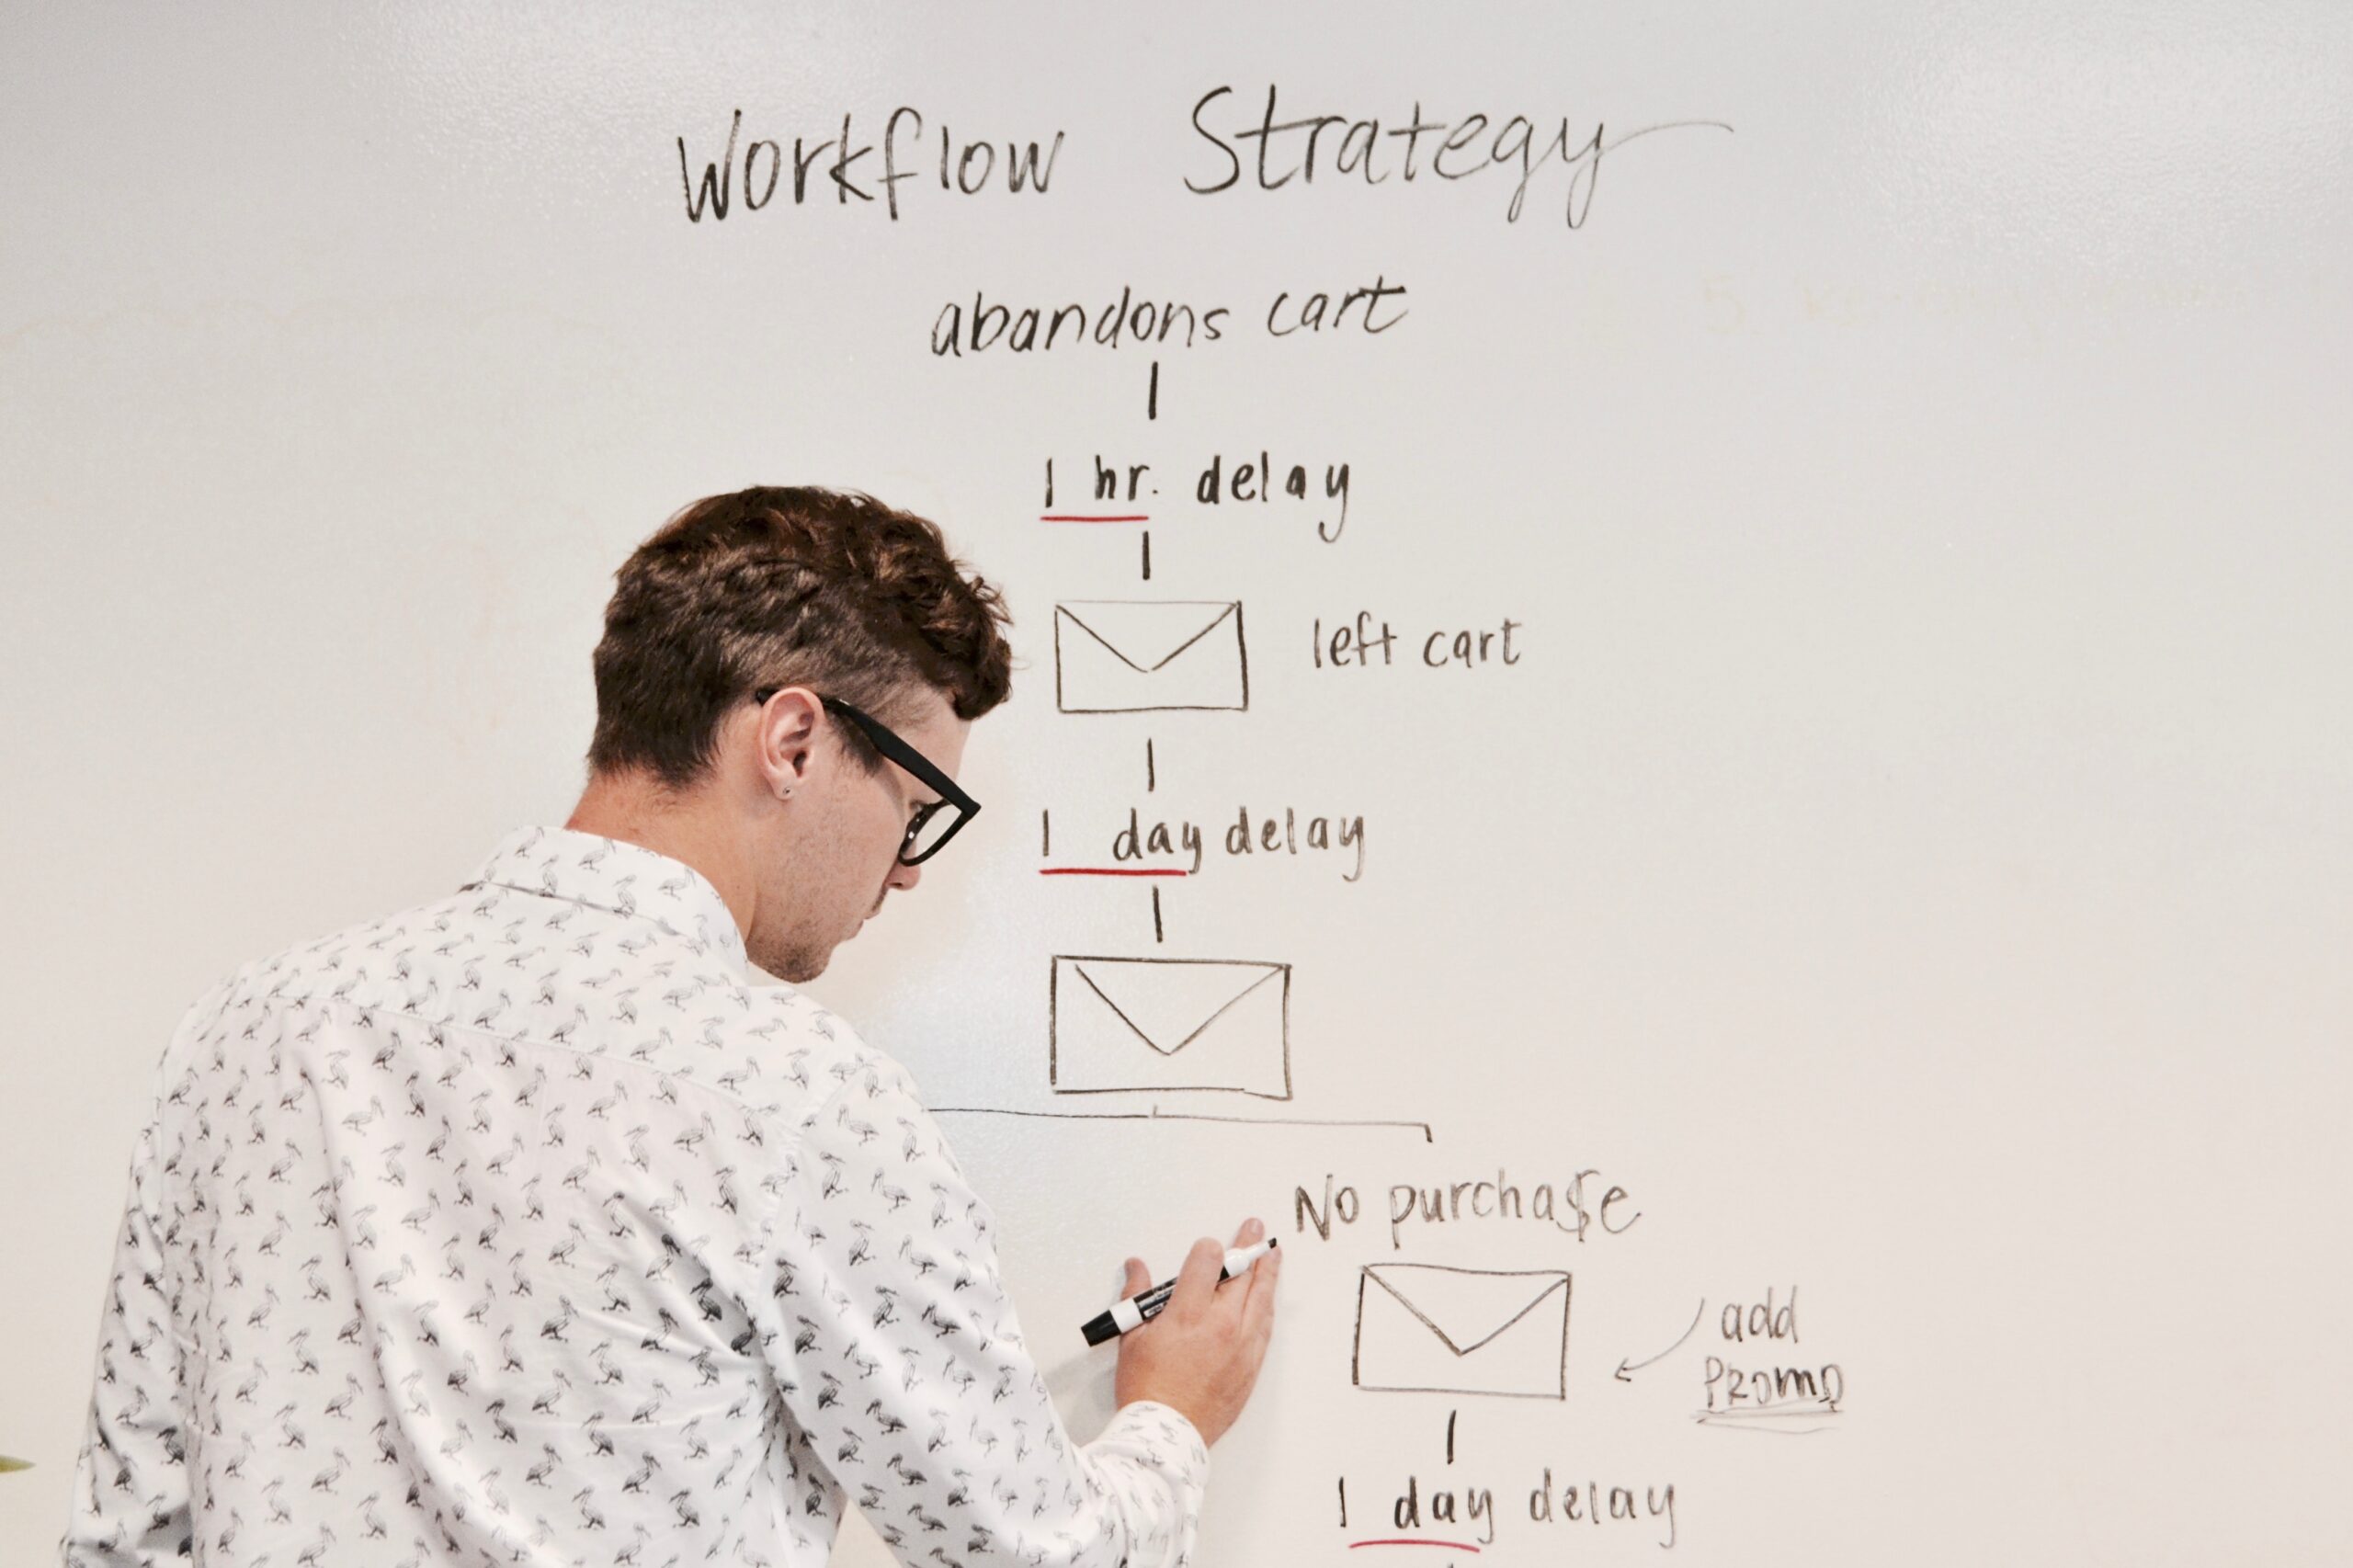 A man writing on a whiteboard with a marker while discussing ways to automate business processes.